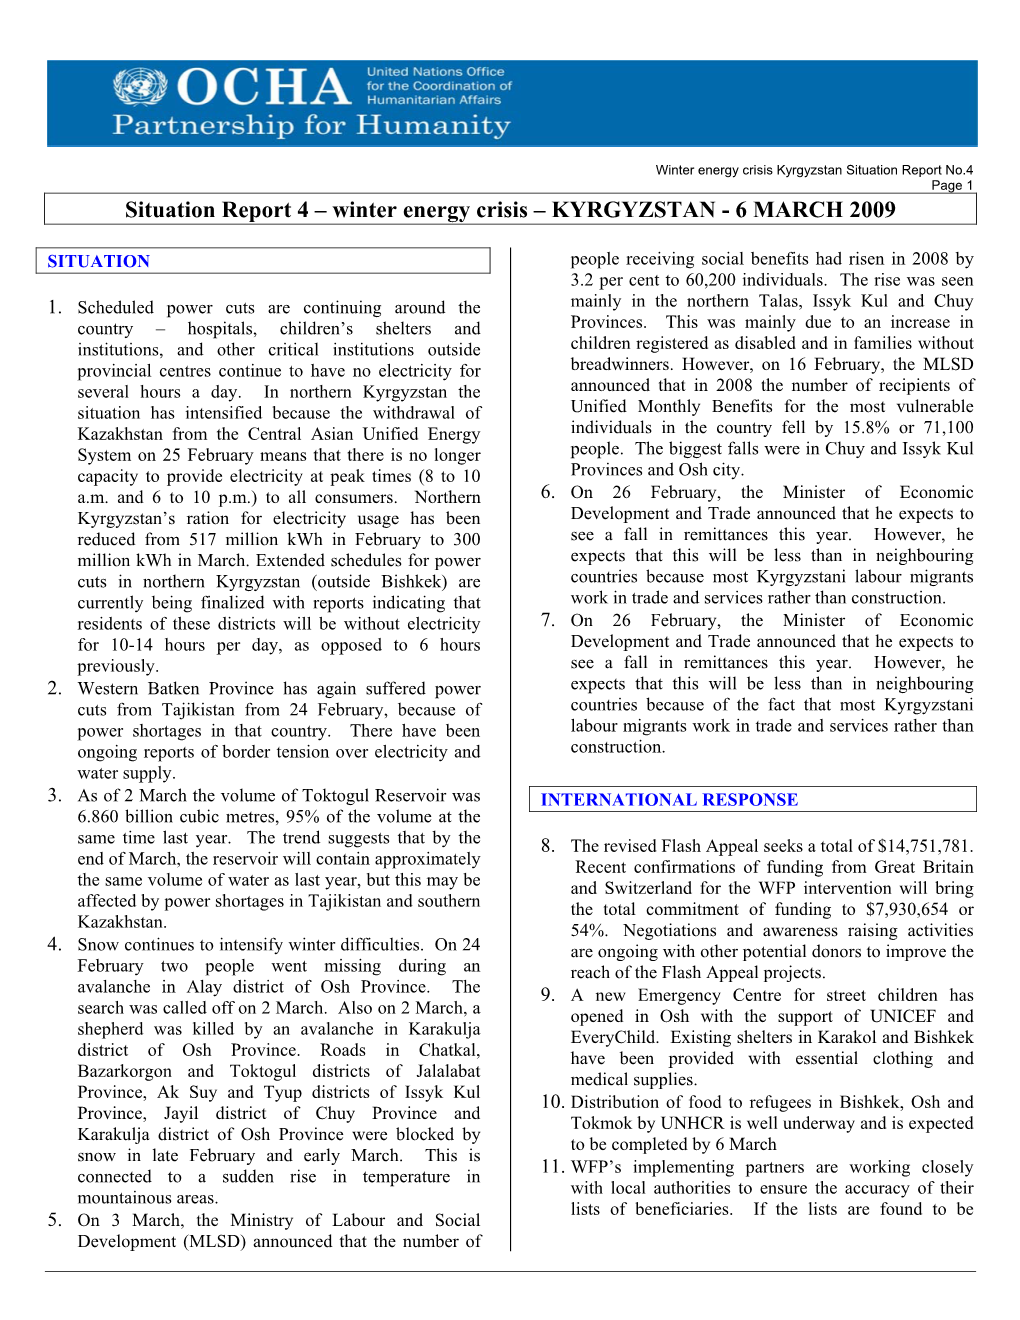 Winter Energy Crisis Kyrgyzstan Situation Report No.4 Page 1 Situation Report 4 – Winter Energy Crisis – KYRGYZSTAN - 6 MARCH 2009